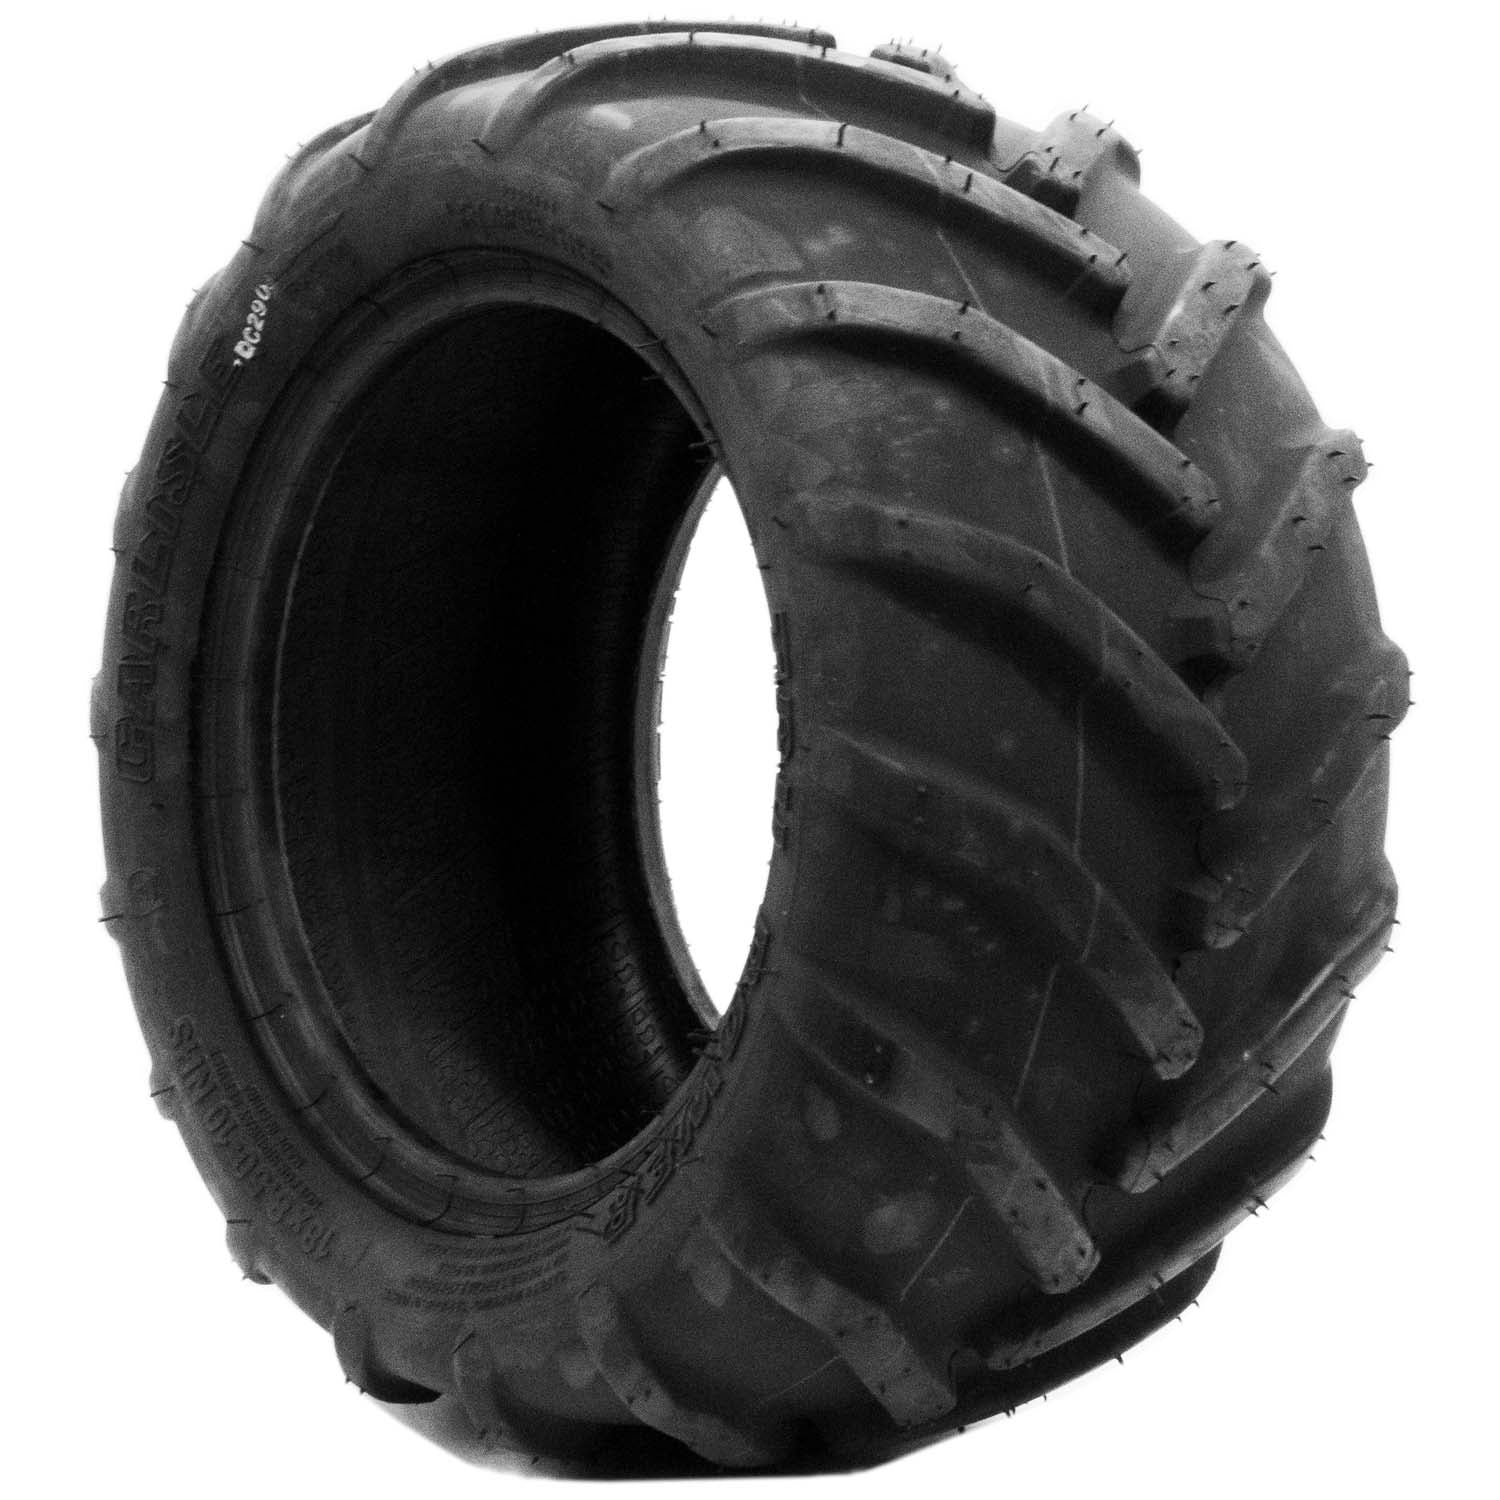 Carlisle Tru Power Lawn and Garden Traction Tire 4ply 26x12.00-12